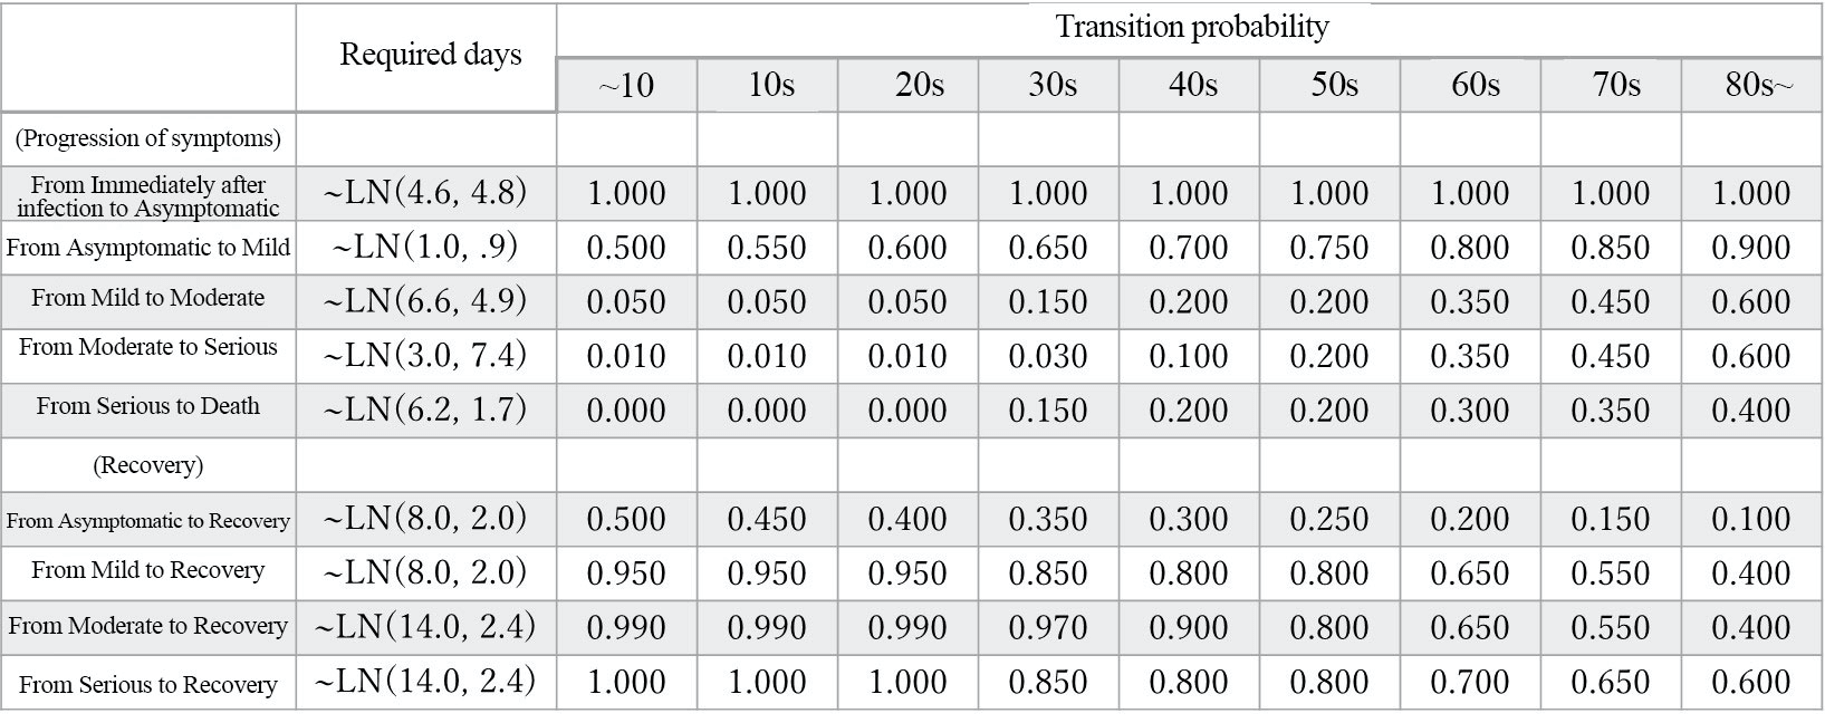 Number of days required for state transition and transition probability